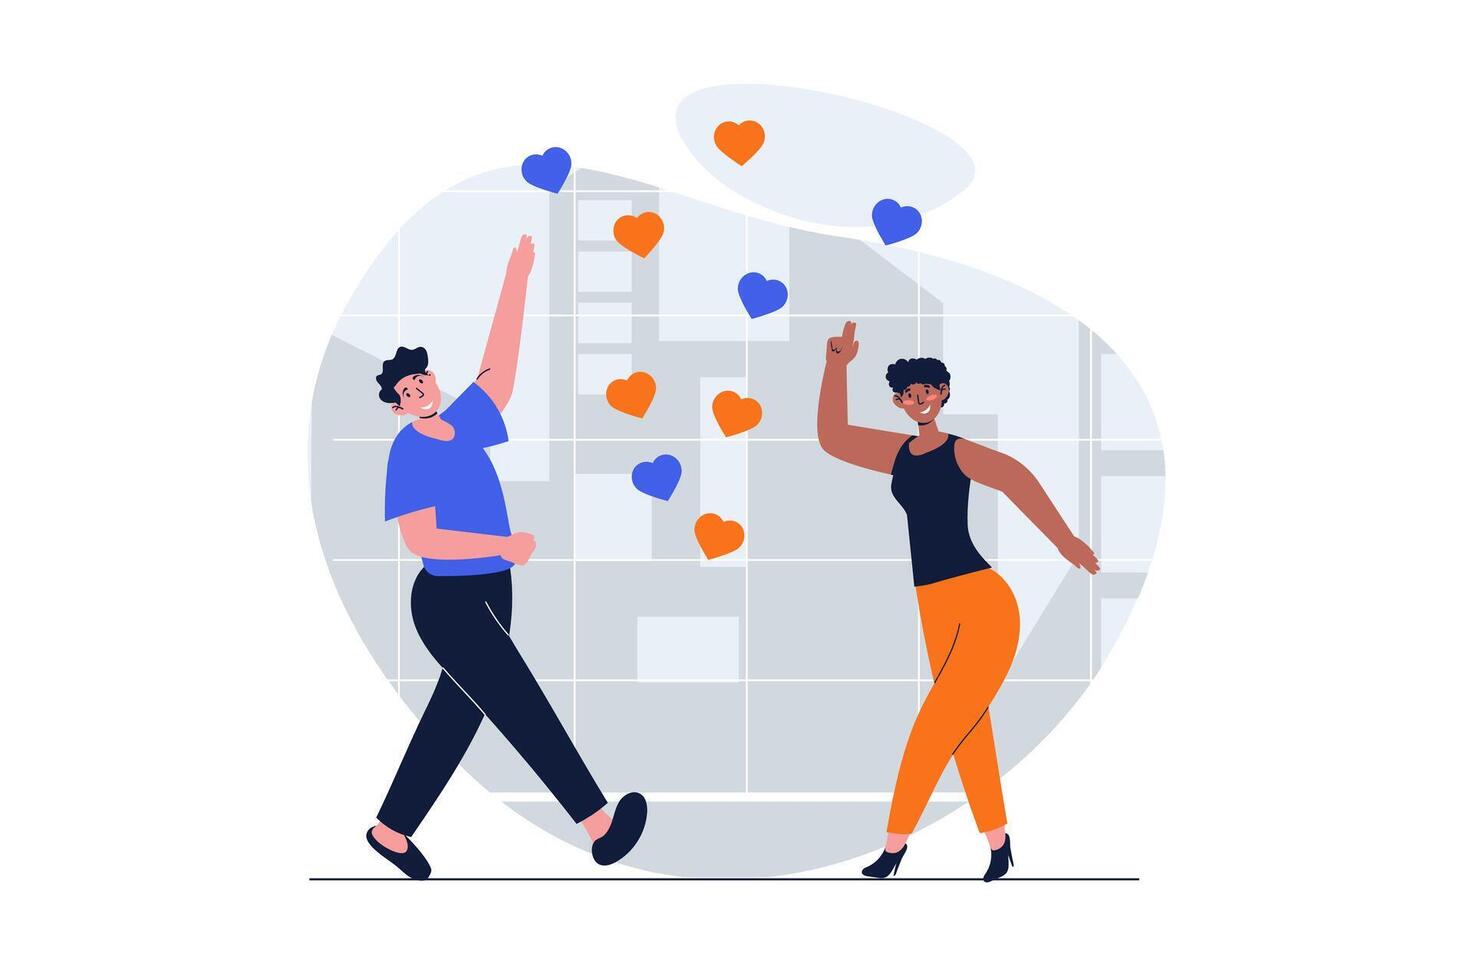 People dancing web concept with character scene. Man and woman enjoying dance in discotheques or studio. People situation in flat design. Vector illustration for social media marketing material.